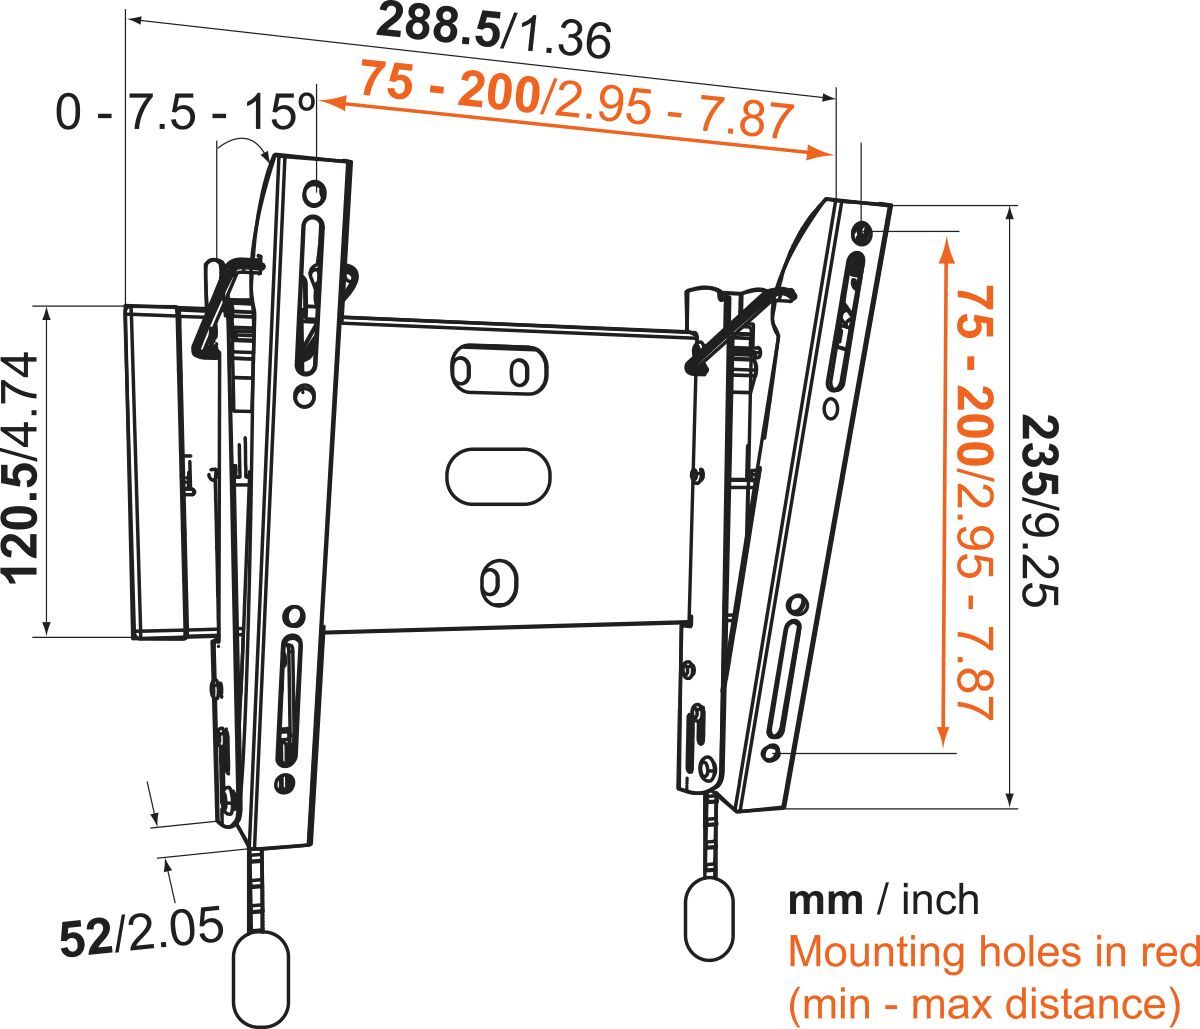 Vogel's BASE 15 S Tilting TV Wall Mount - Suitable for 19 up to 43 inch TVs up to Dimensions